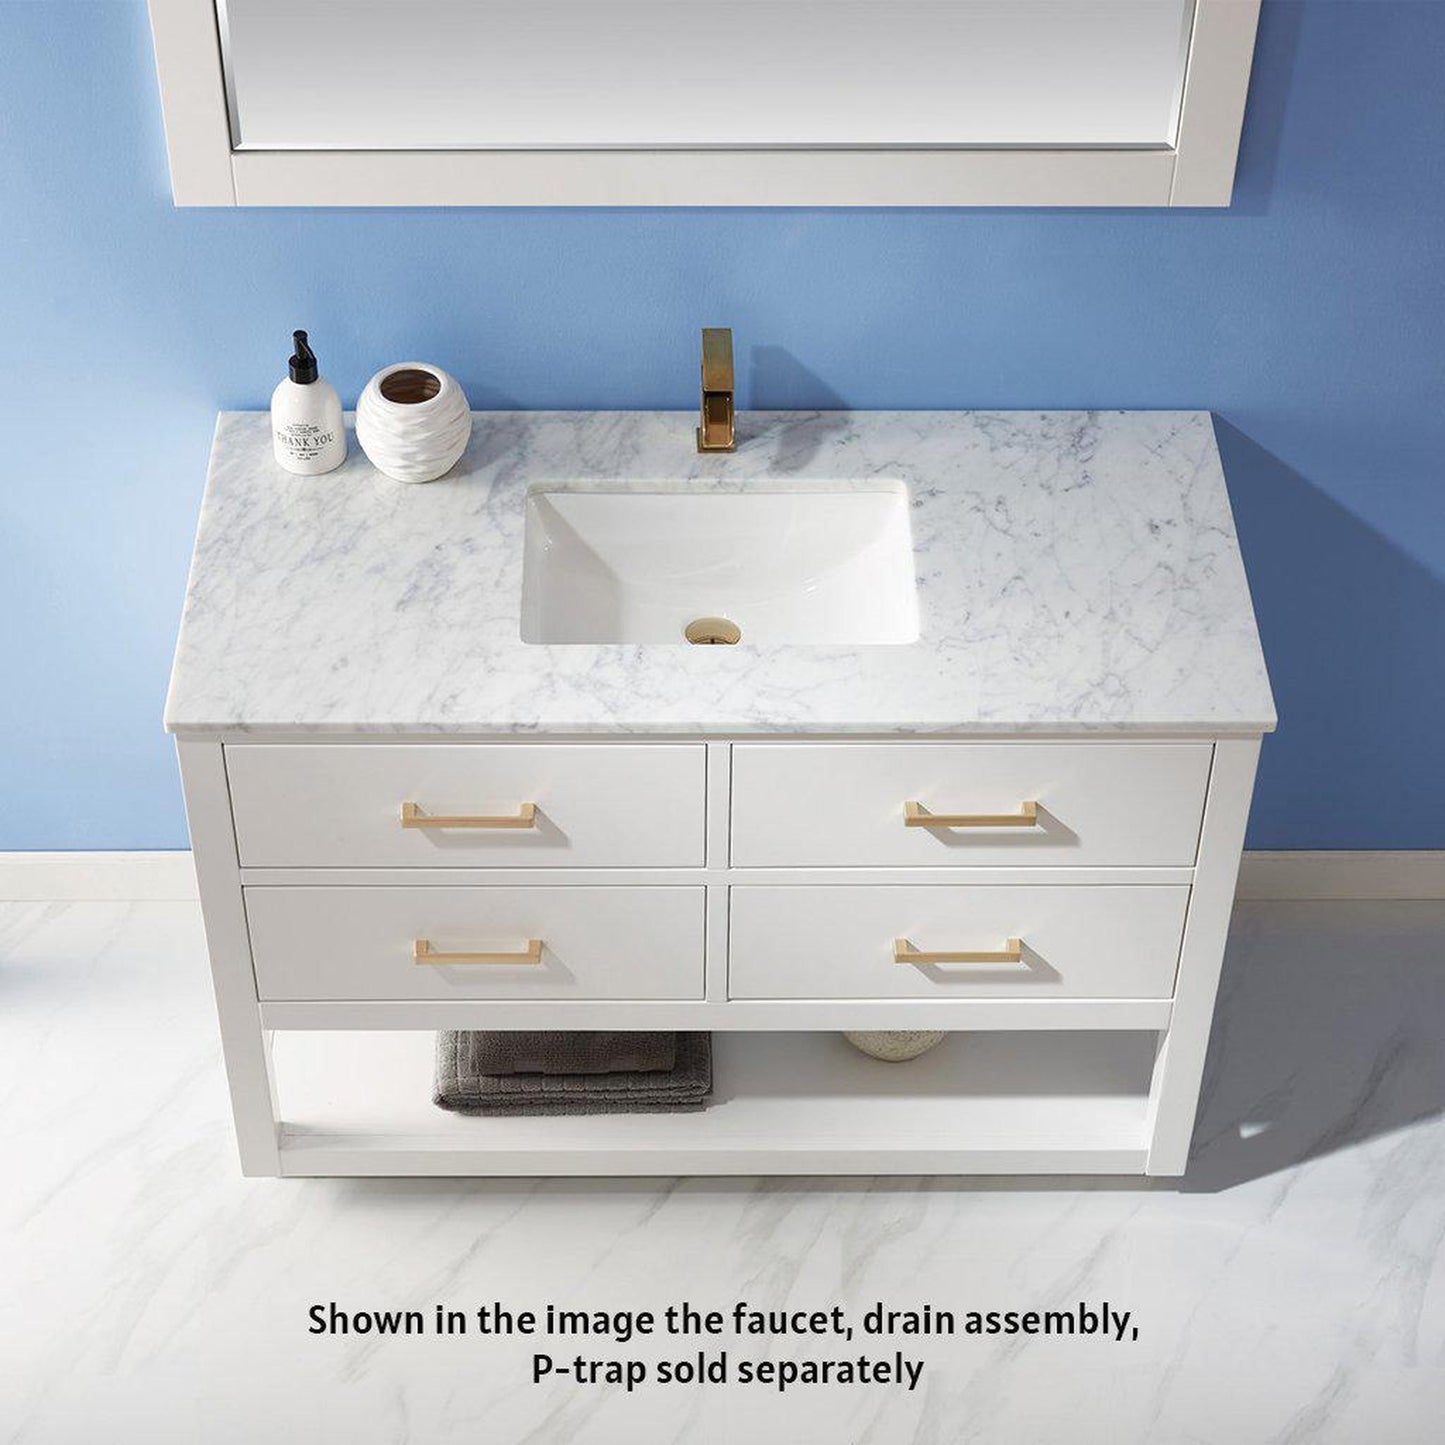 Altair Remi 48" Single White Freestanding Bathroom Vanity Set With Mirror, Natural Carrara White Marble Top, Rectangular Undermount Ceramic Sink, and Overflow